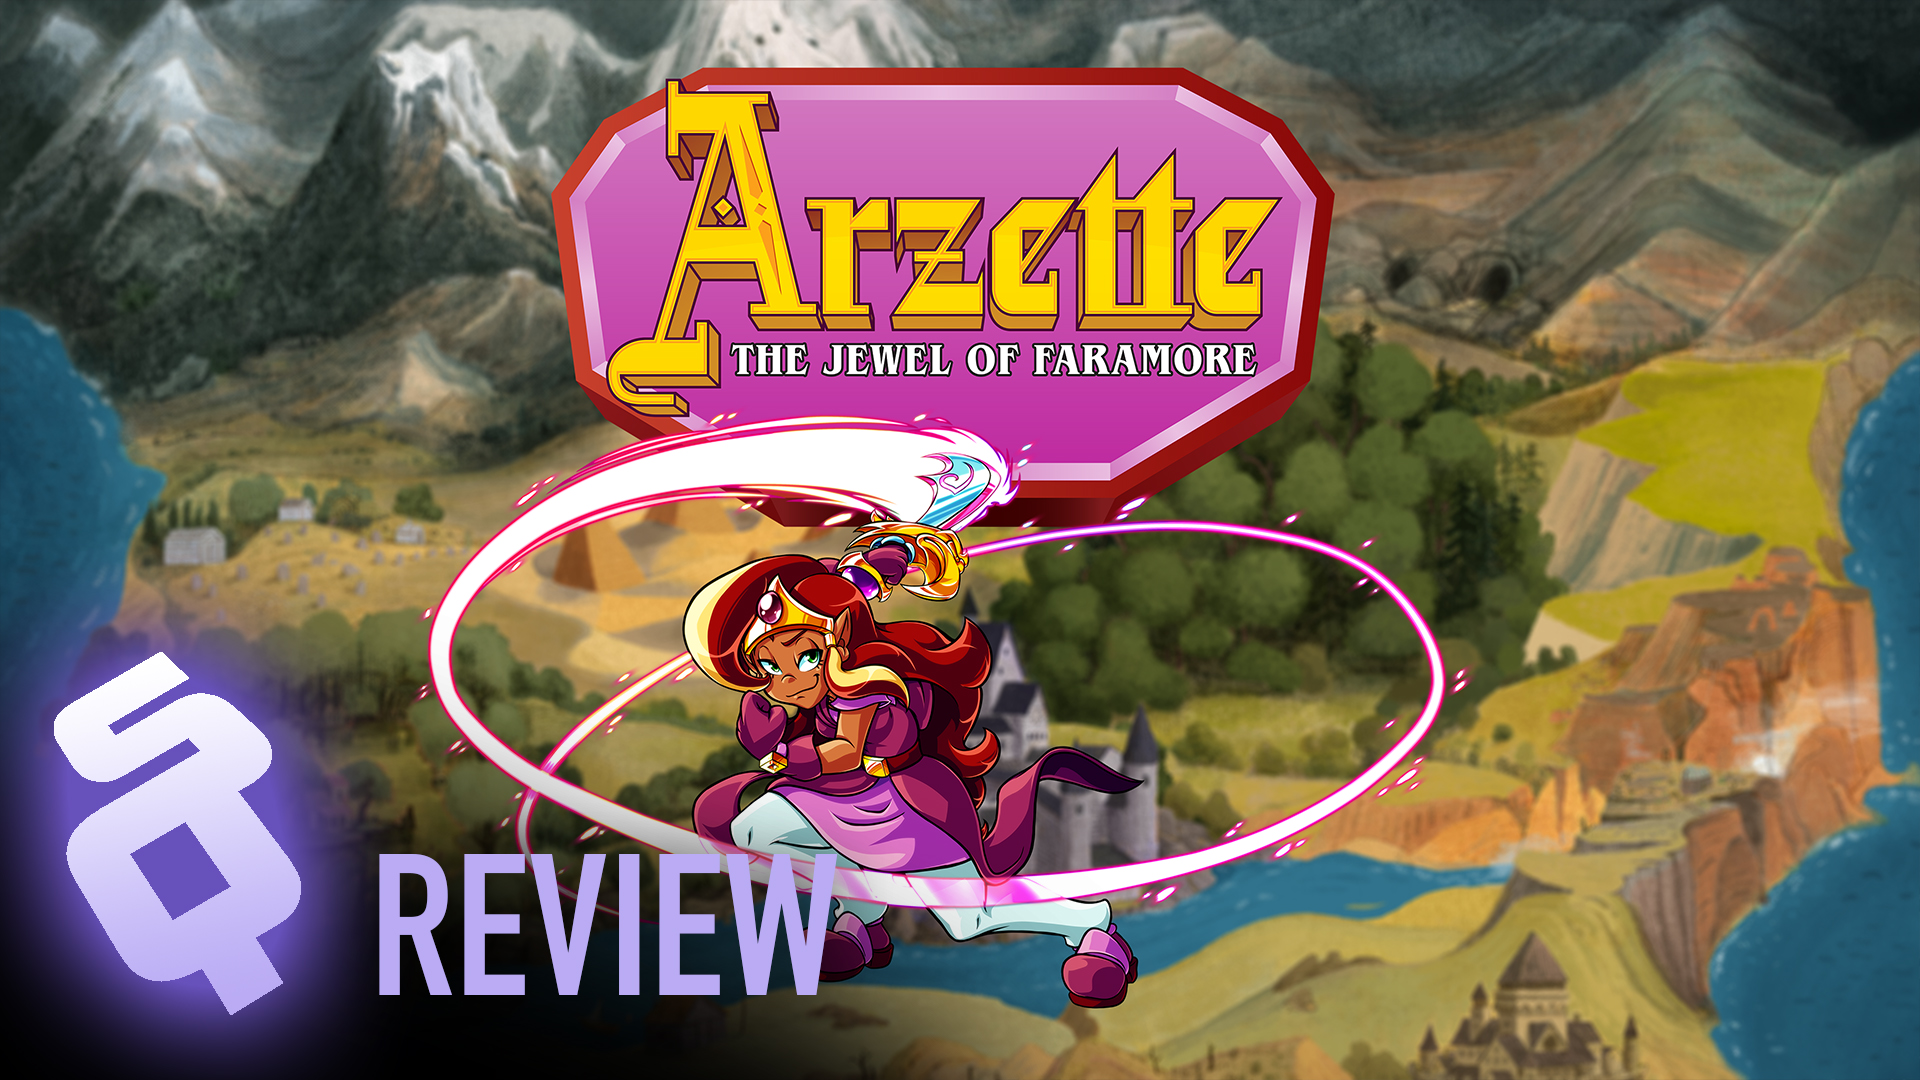 Arzette: The Jewel of Faramore review